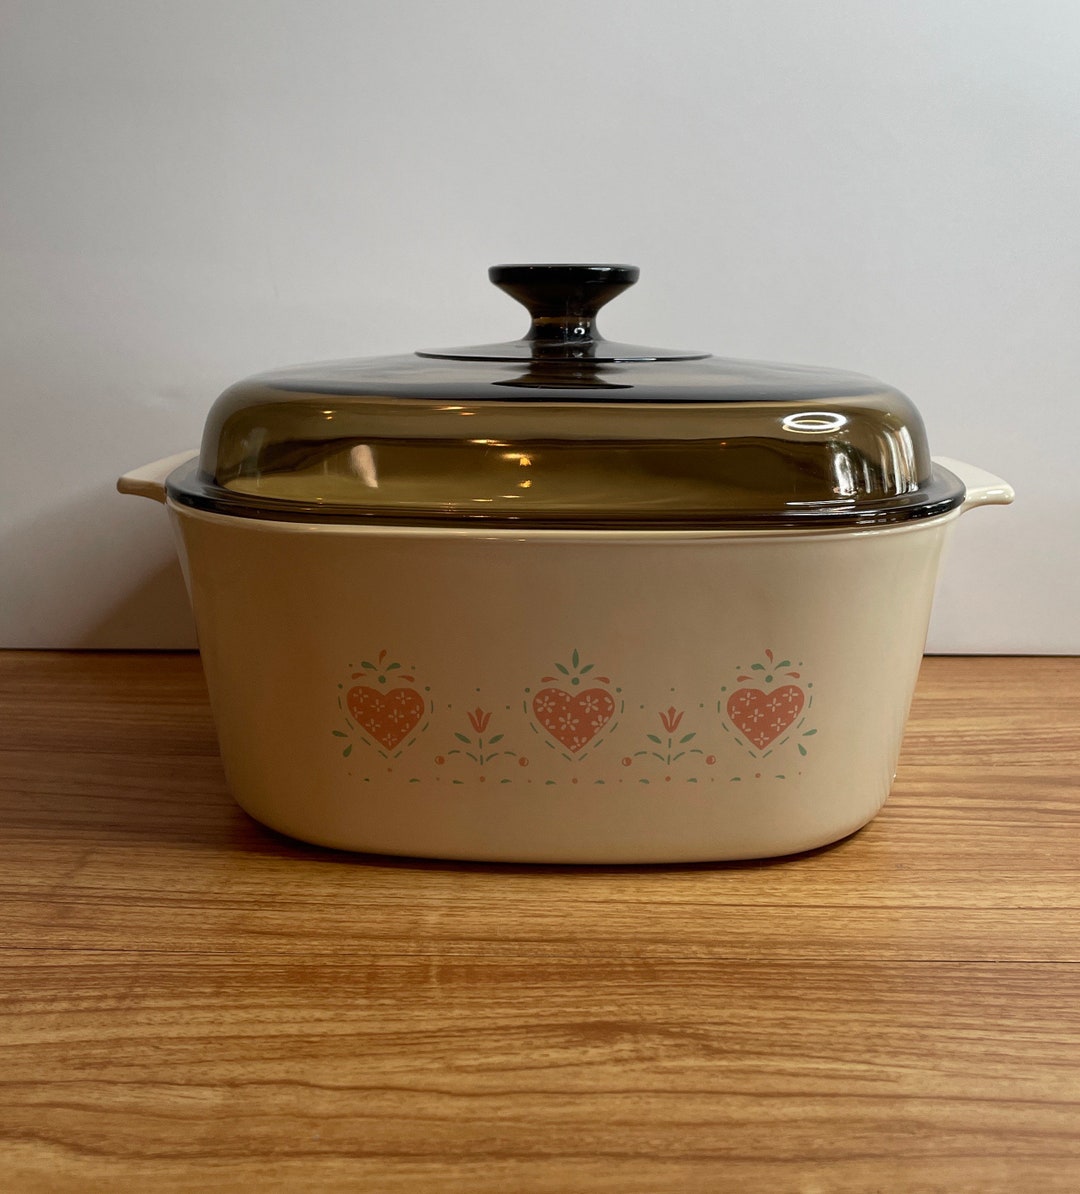 5 Liter Forever Yours Corning Ware Roaster Vintage Dutch Oven Made in USA  Glass Ovenware A5B -  Norway